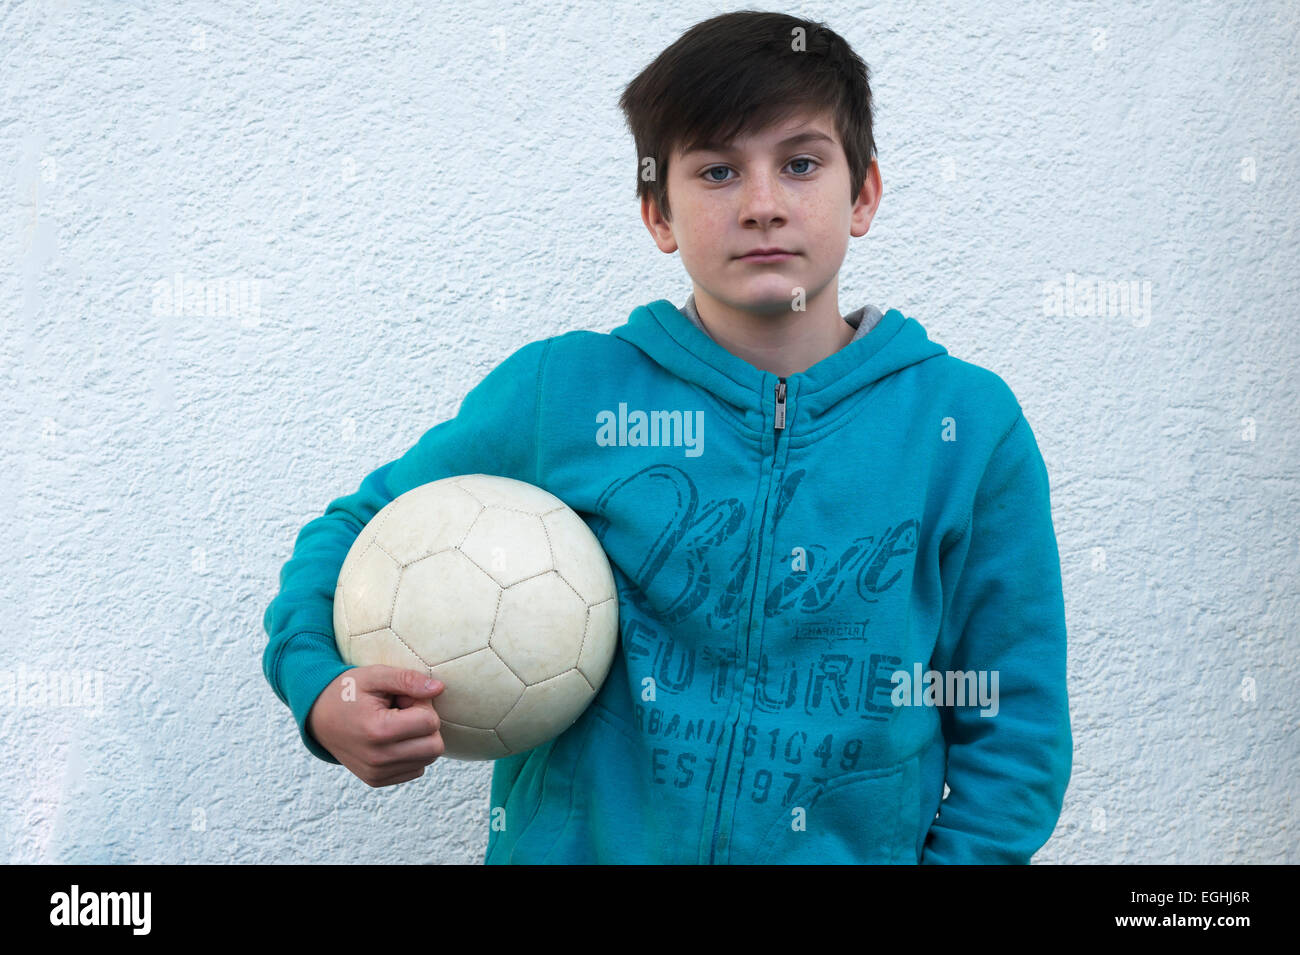 Boy, 10 years, holding a football under his arm, standing in front of a white wall, Baden-Württemberg, Germany Stock Photo